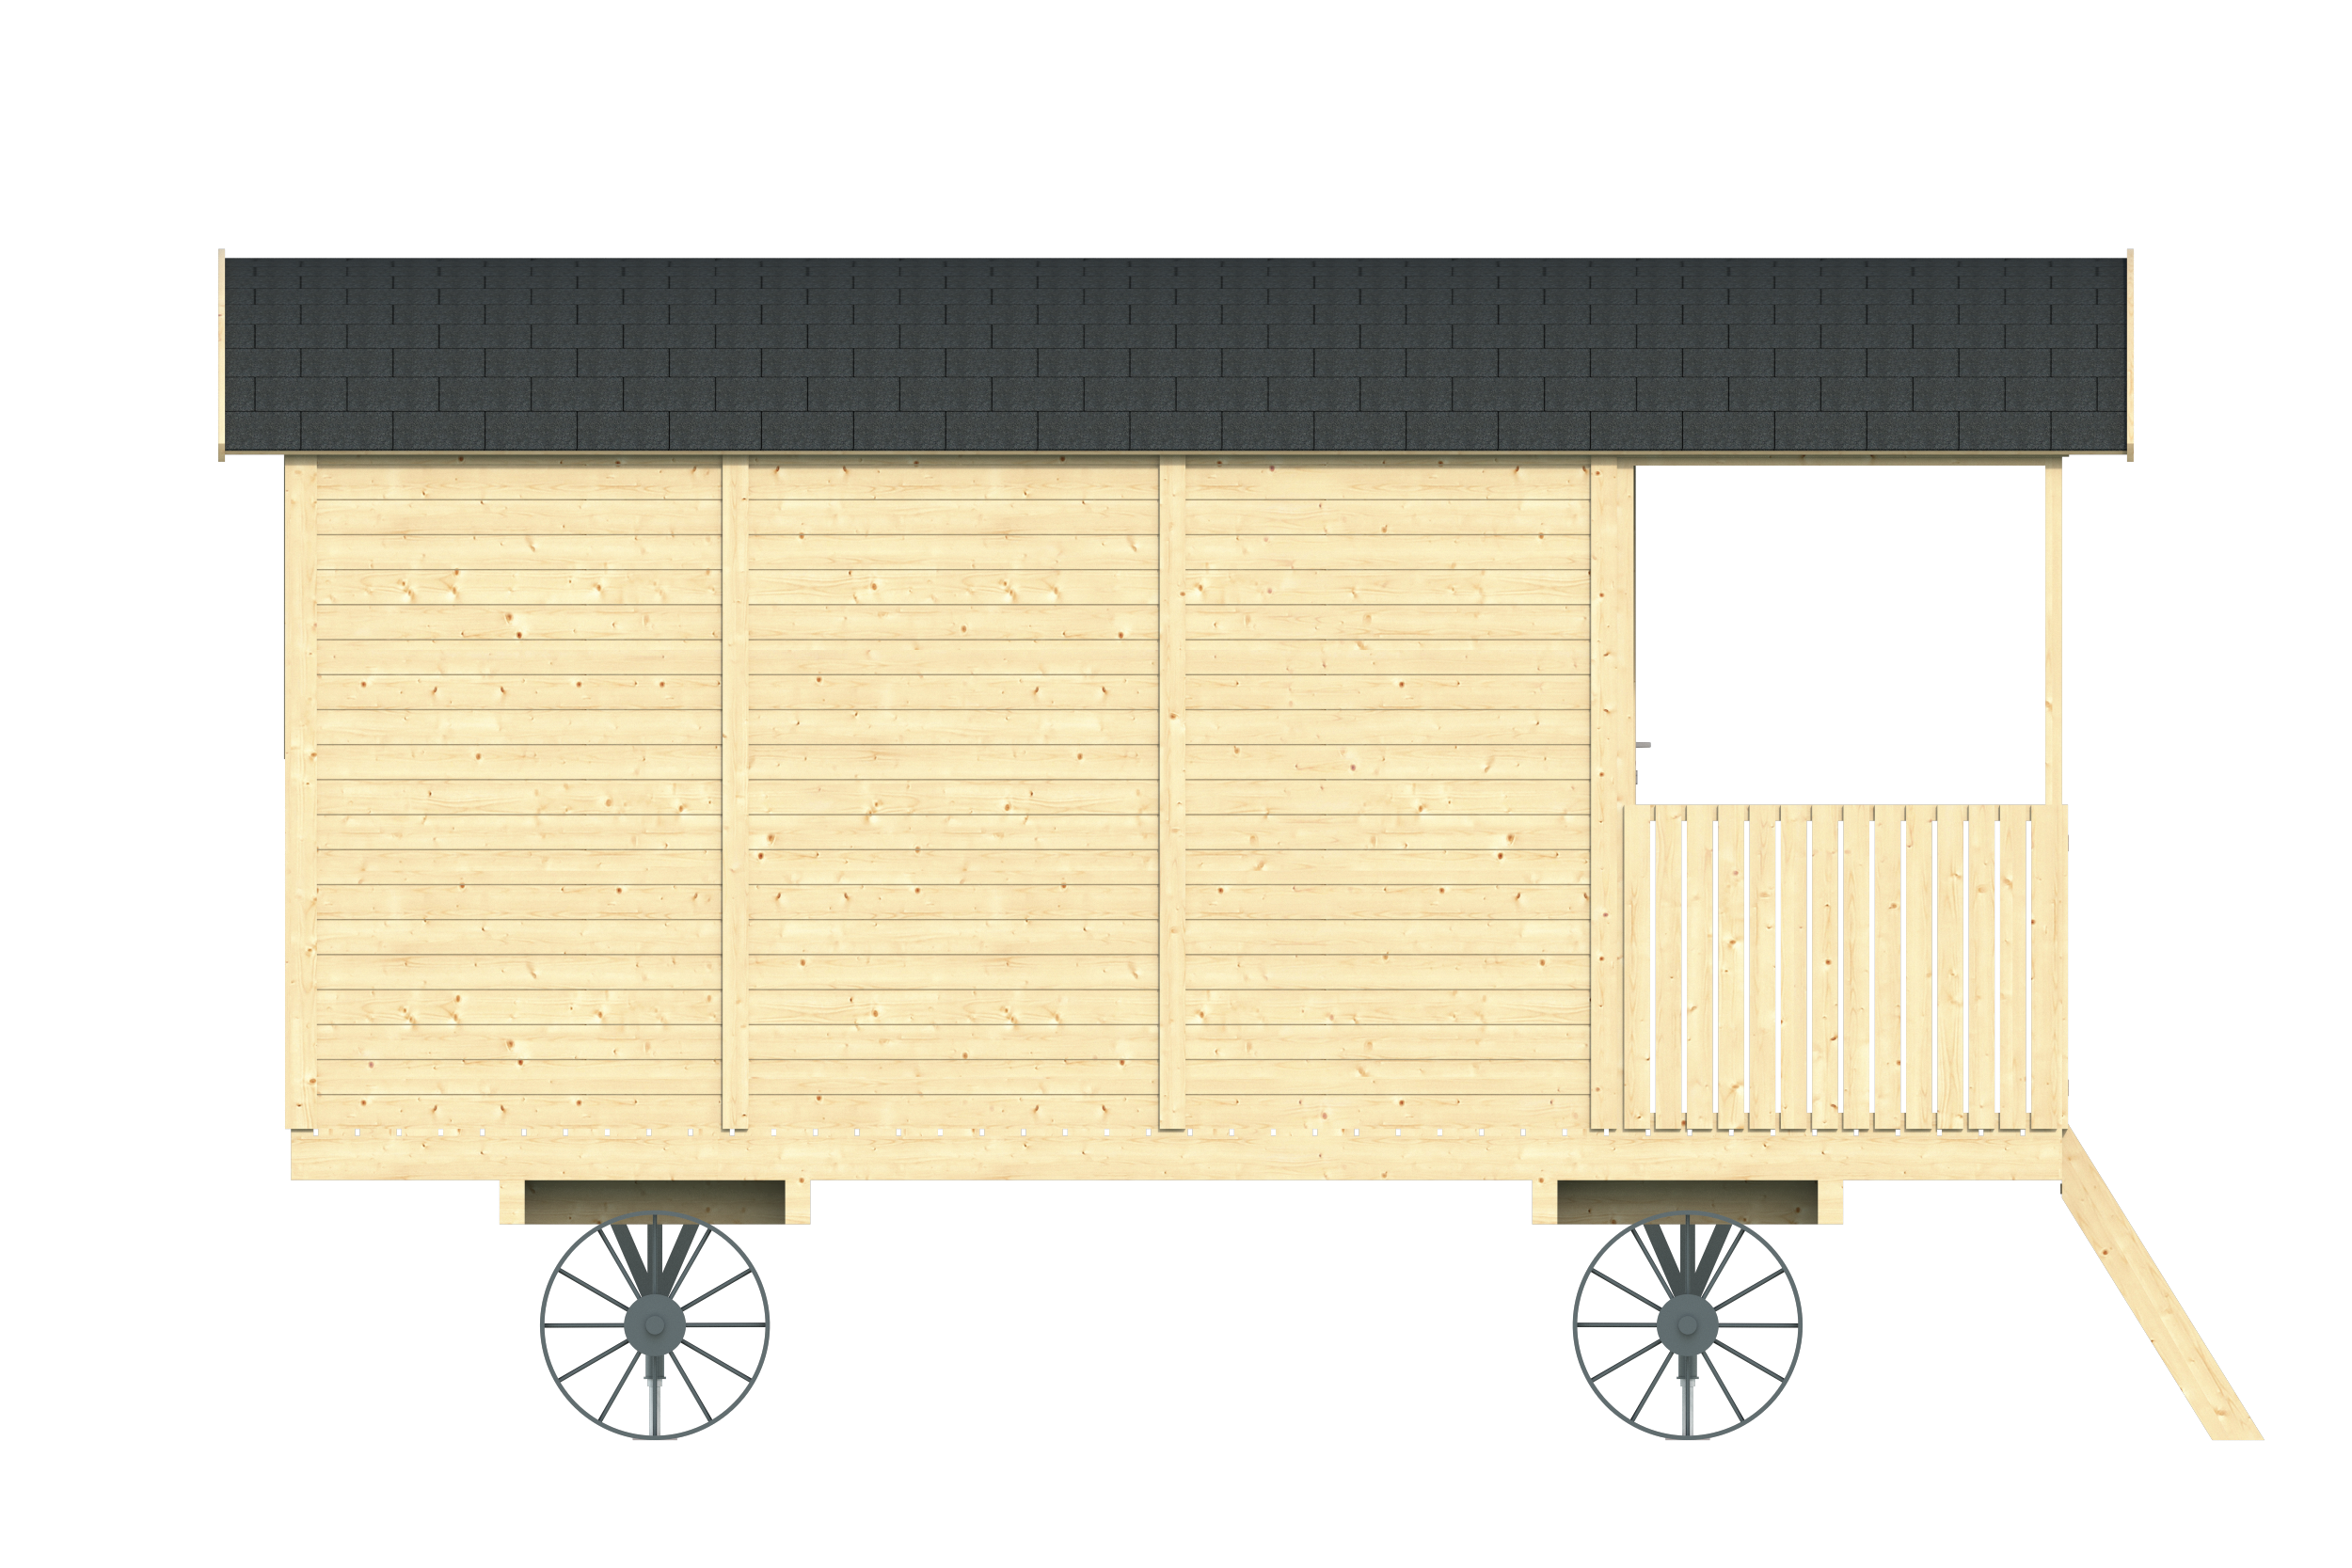 Paddy circus wagon - excl. Wheelsets